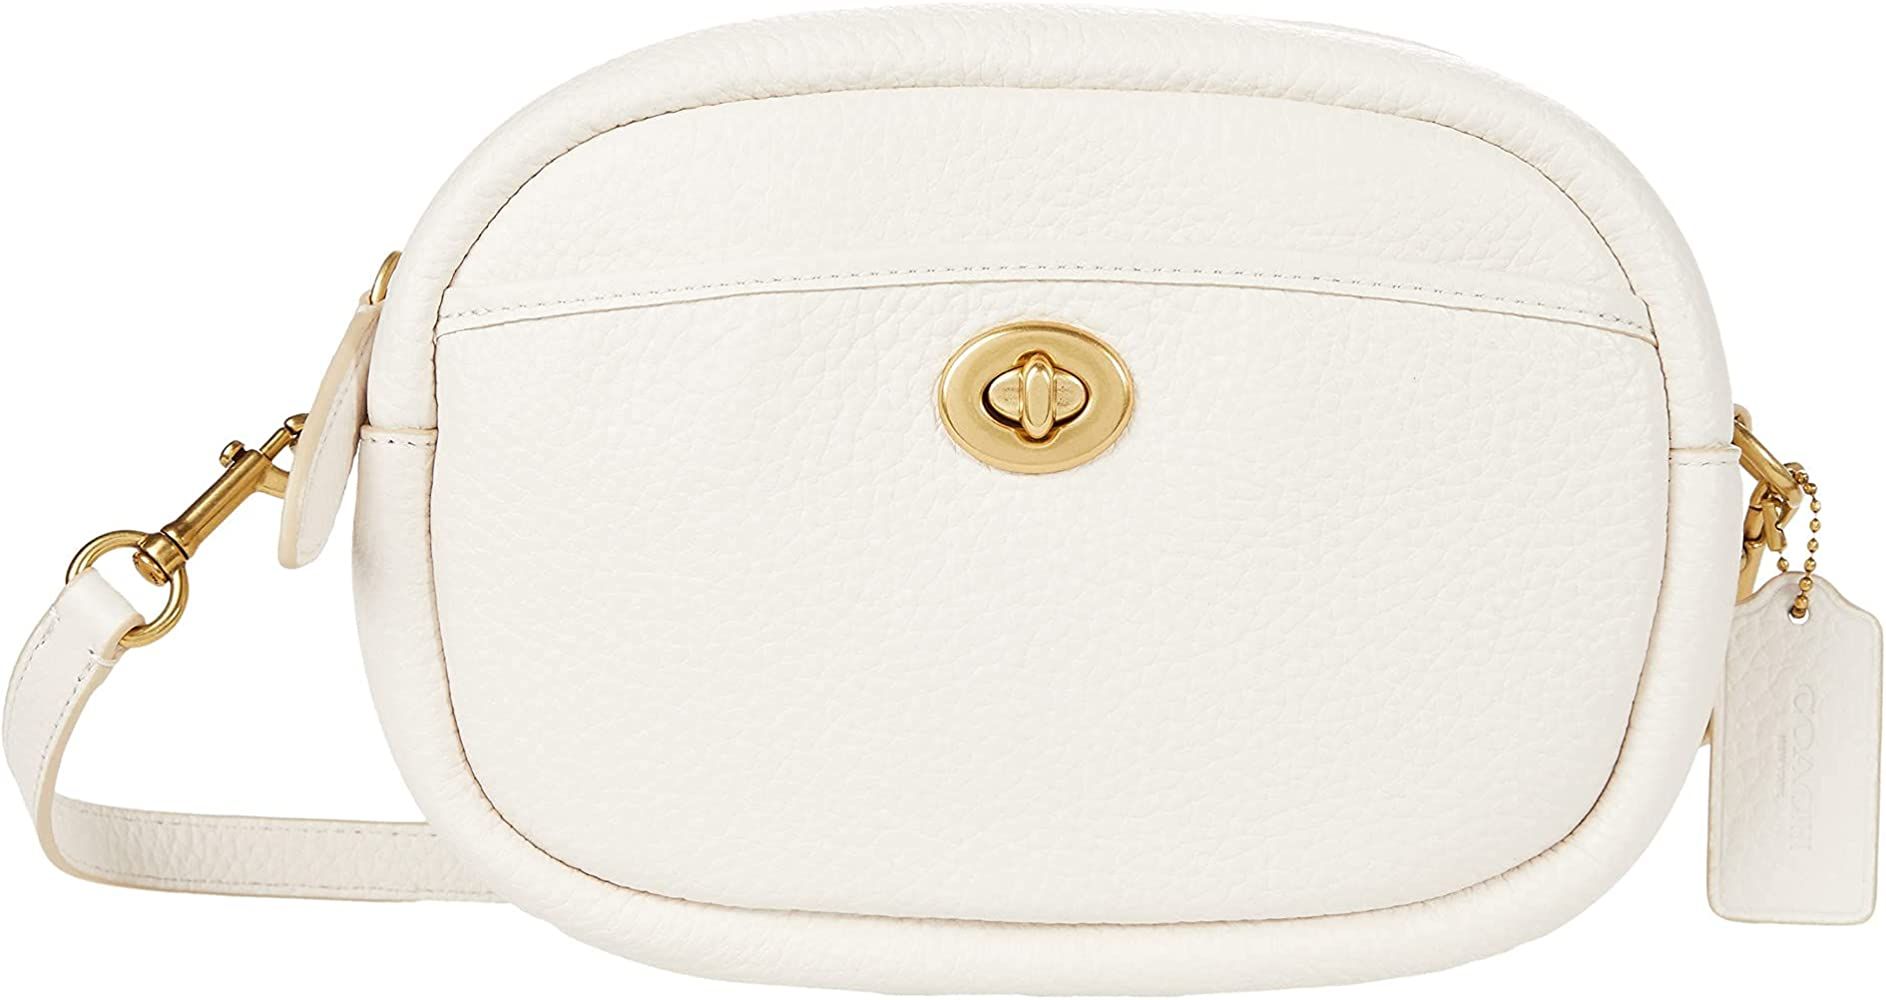 COACH Soft Pebble Leather Camera Bag with Leather Strap | Amazon (US)